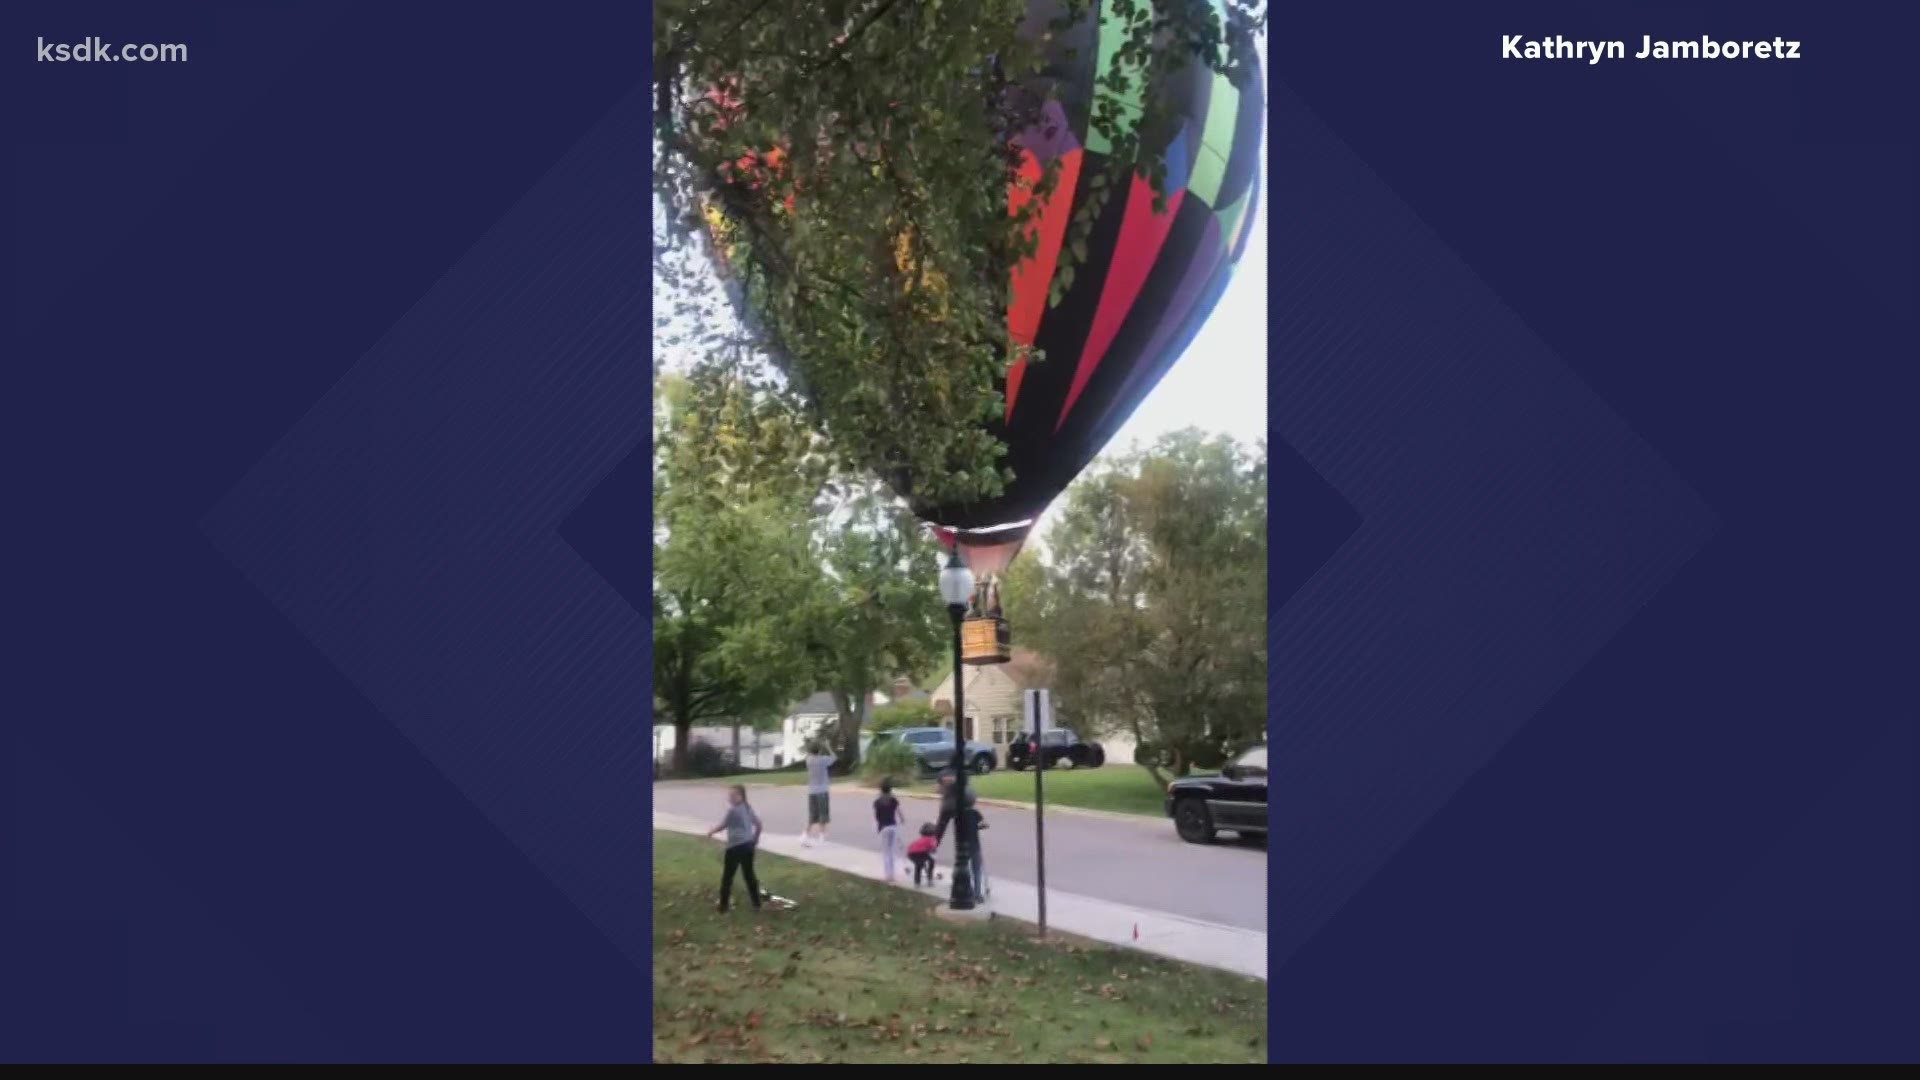 The balloon landed safely